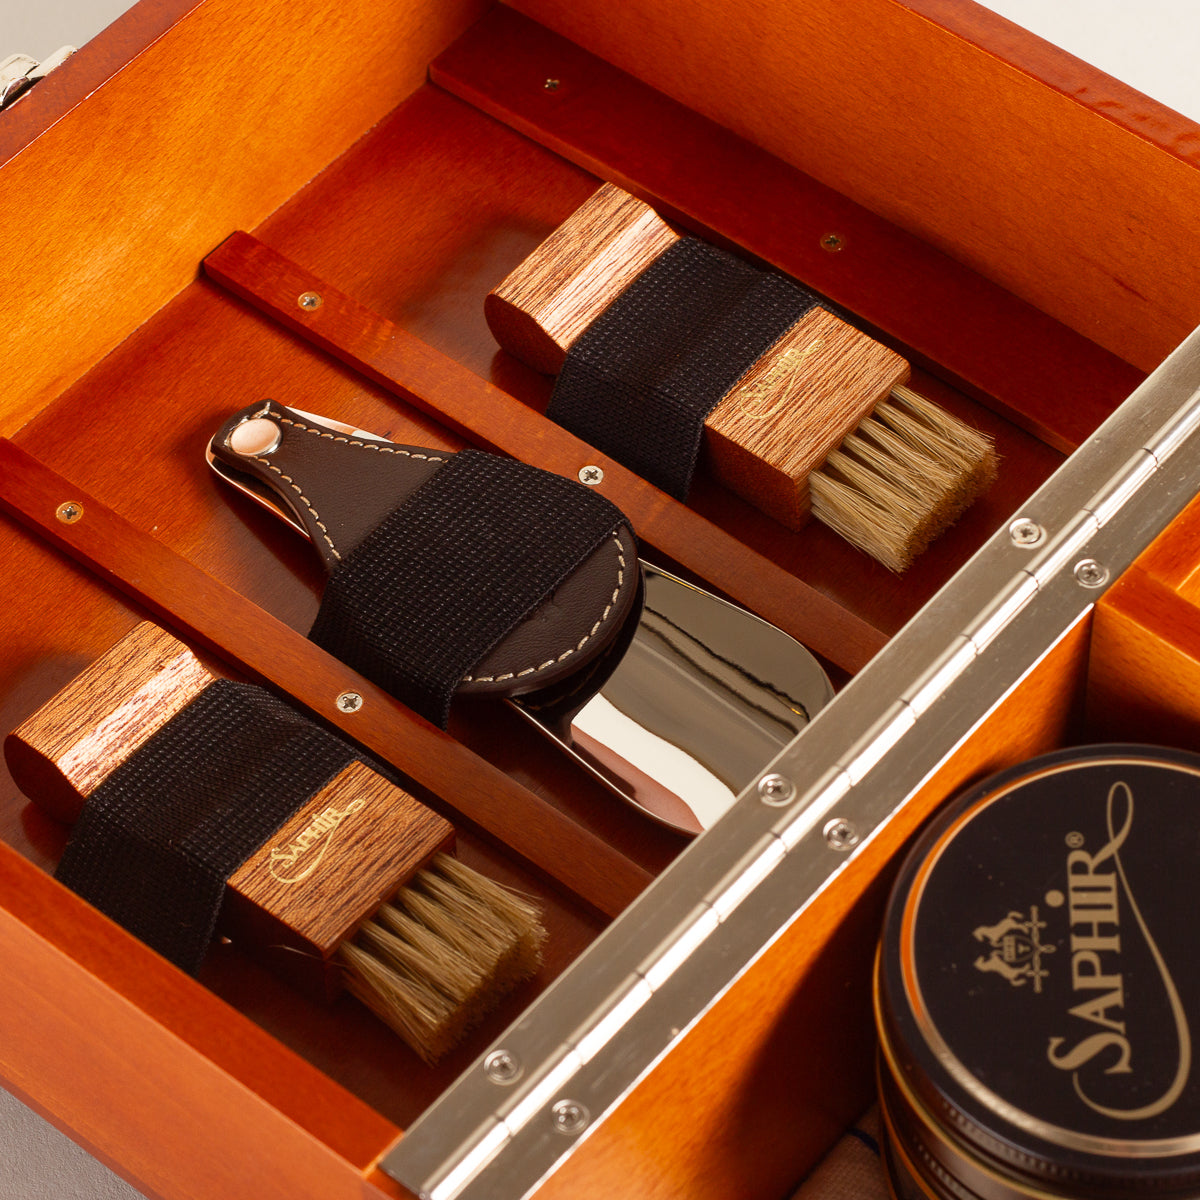 Saphir Médaille d'Or Groom box - Rosewood finish — The Shoe Care Shop